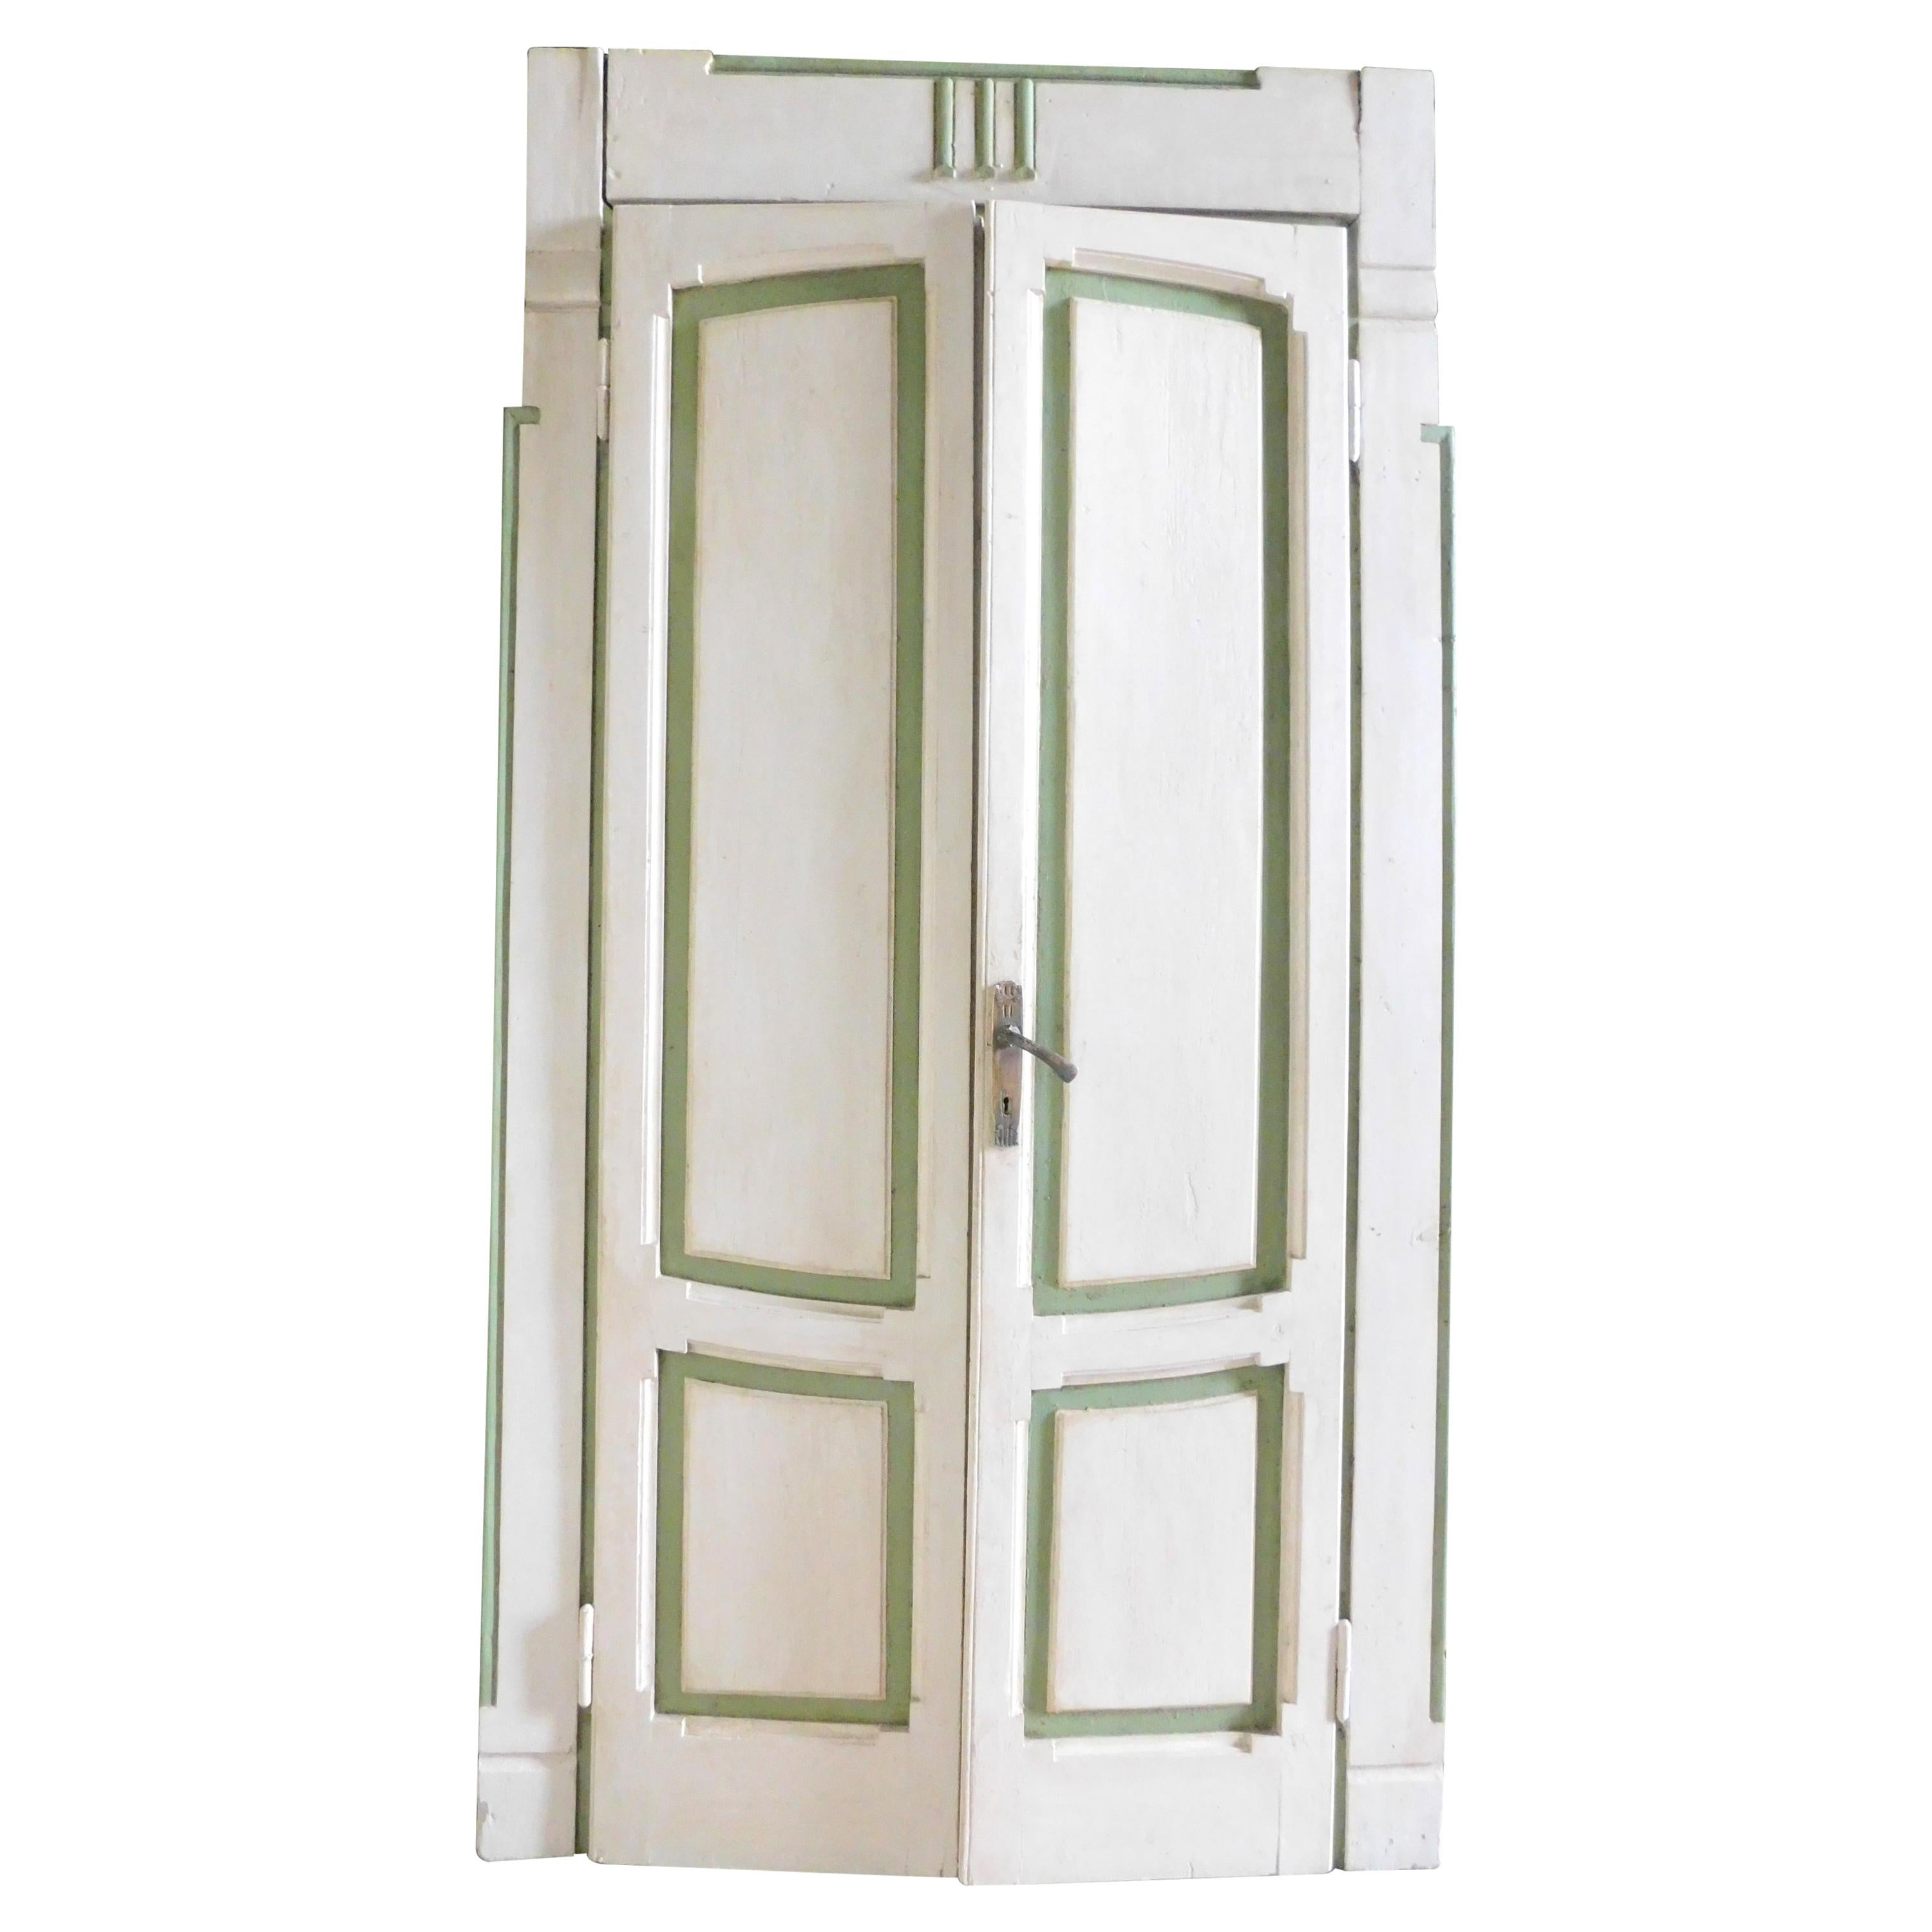 Set of 4 Deco Lacquered Doors, White / Green, Different Size, Milan 1920